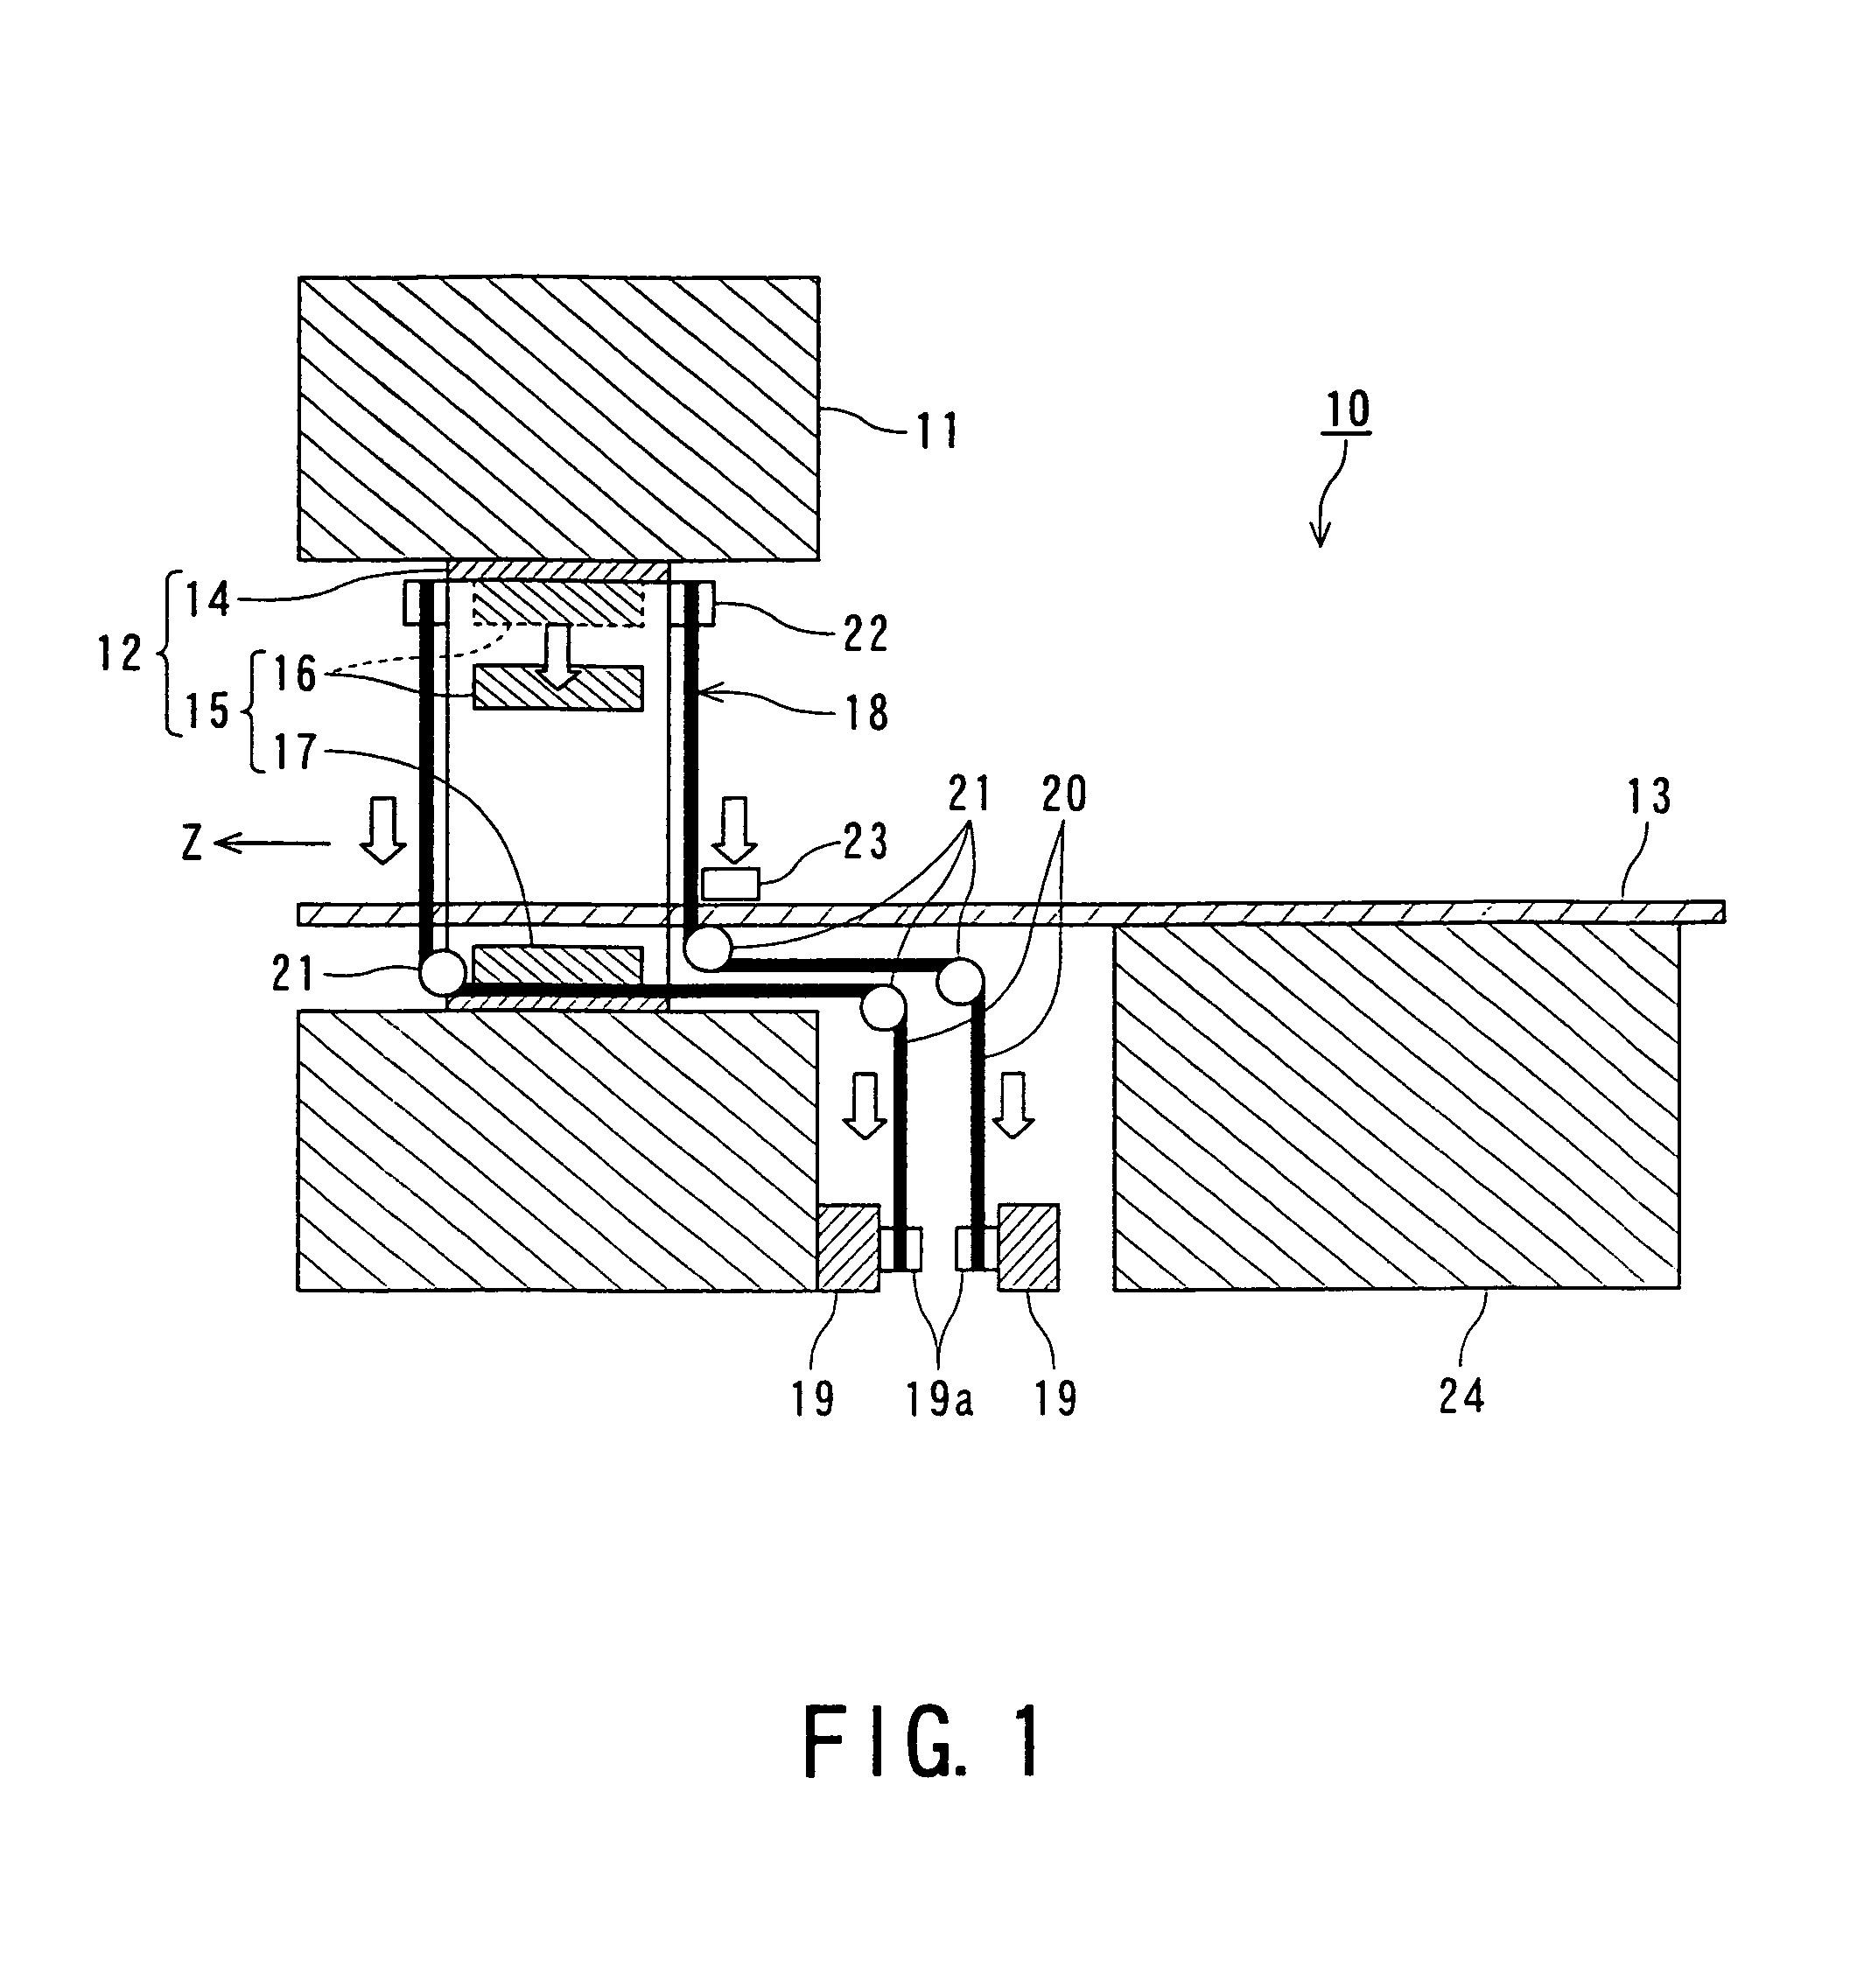 Magnetic resonance imaging apparatus with a movable RF coil having a controllable distance between the movable RF coil and an imaged body surface